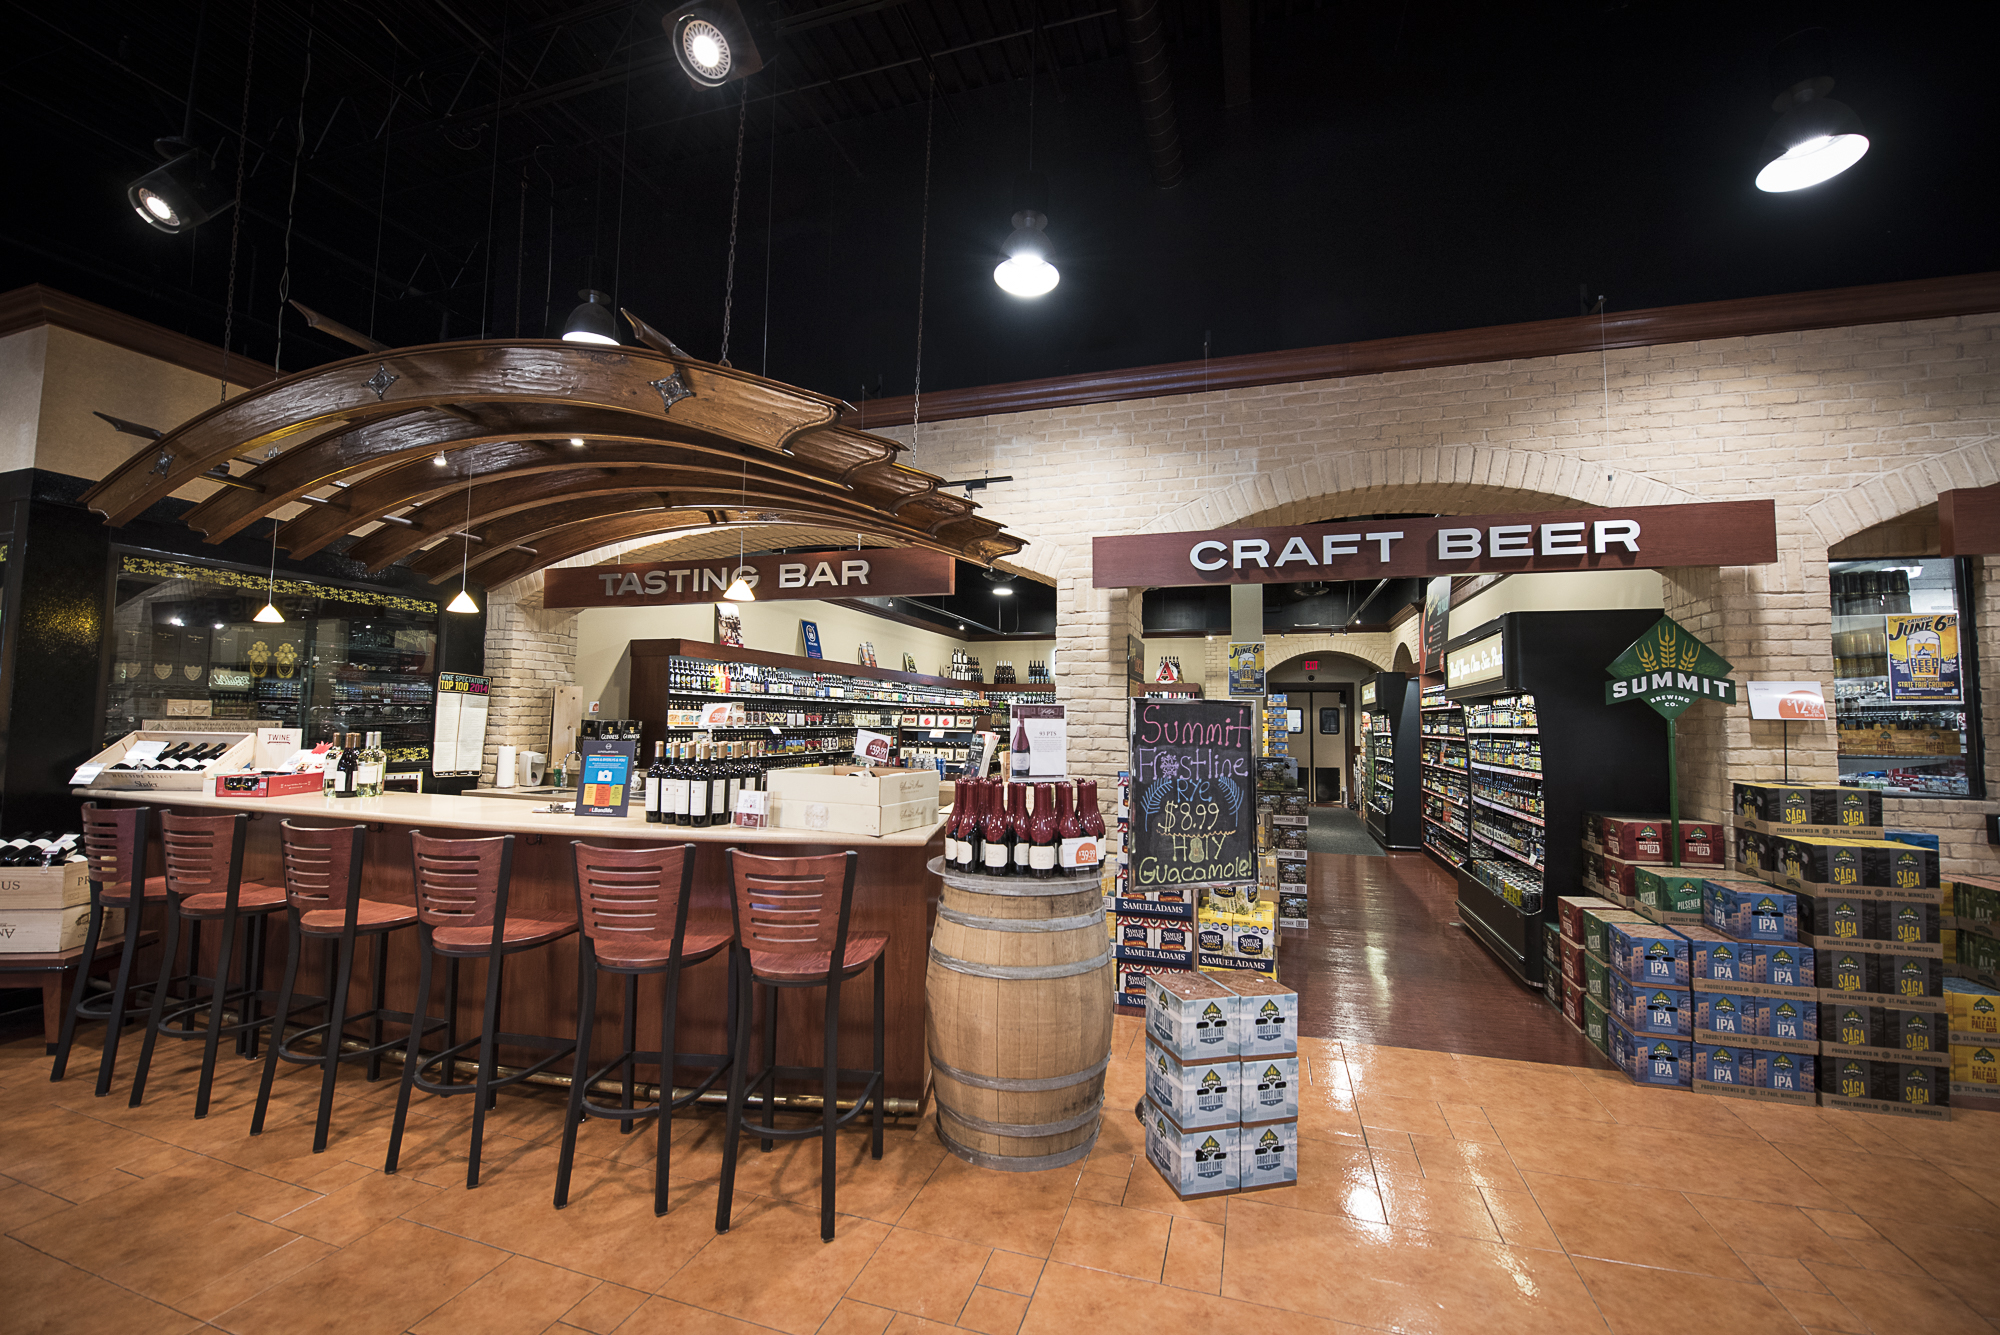 A tasting bar next to a craft beer section.